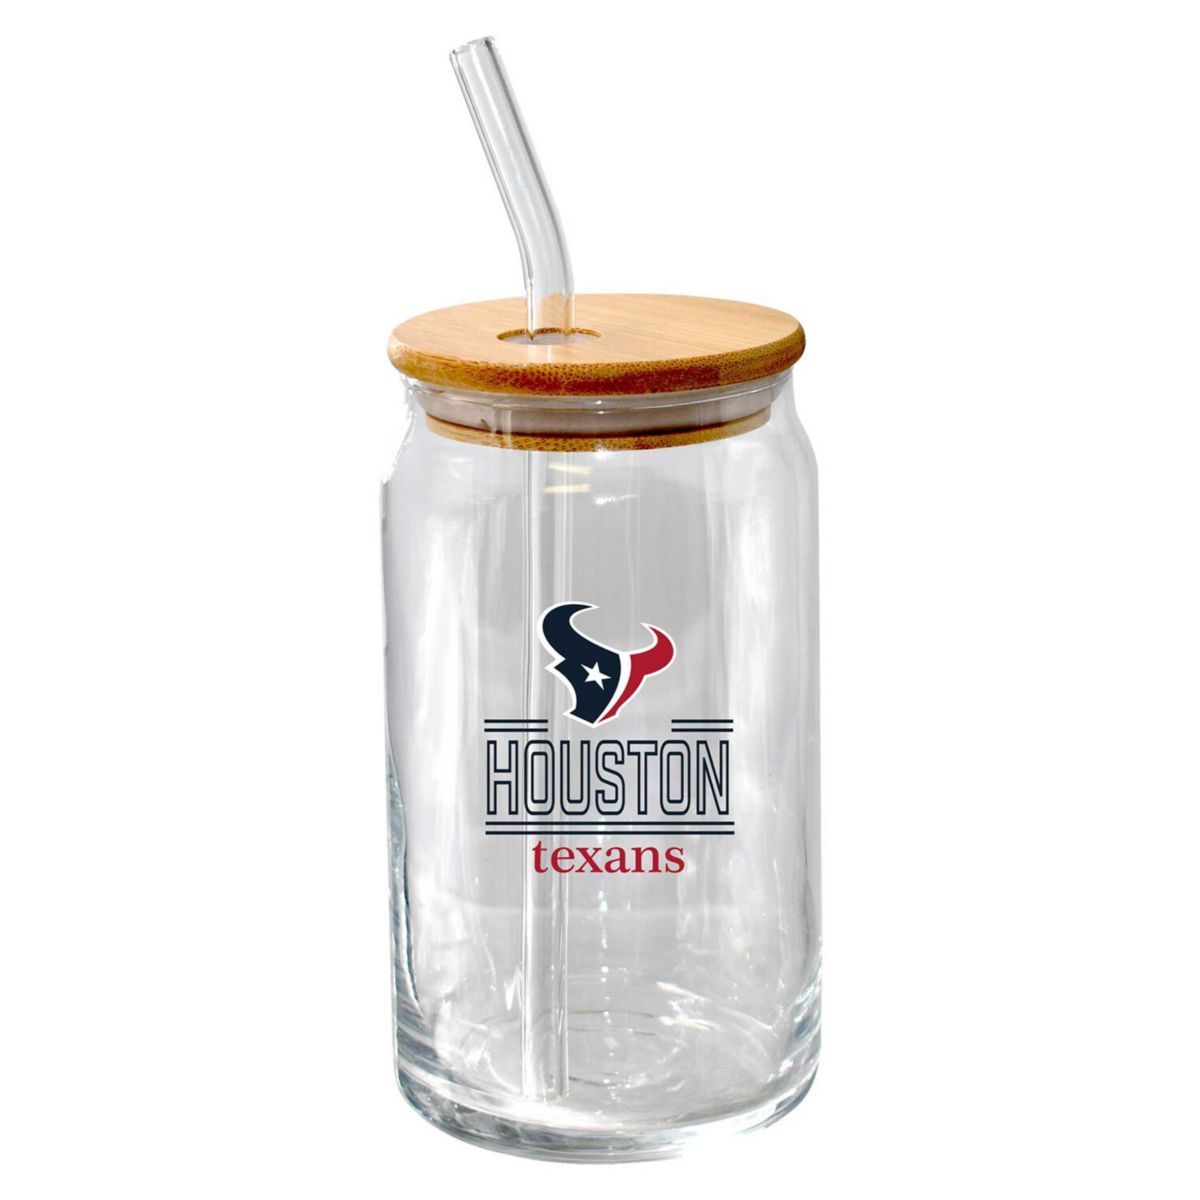 The Memory Company Houston Texans 16oz. Classic Crew Beer Glass with Bamboo Lid The Memory Company